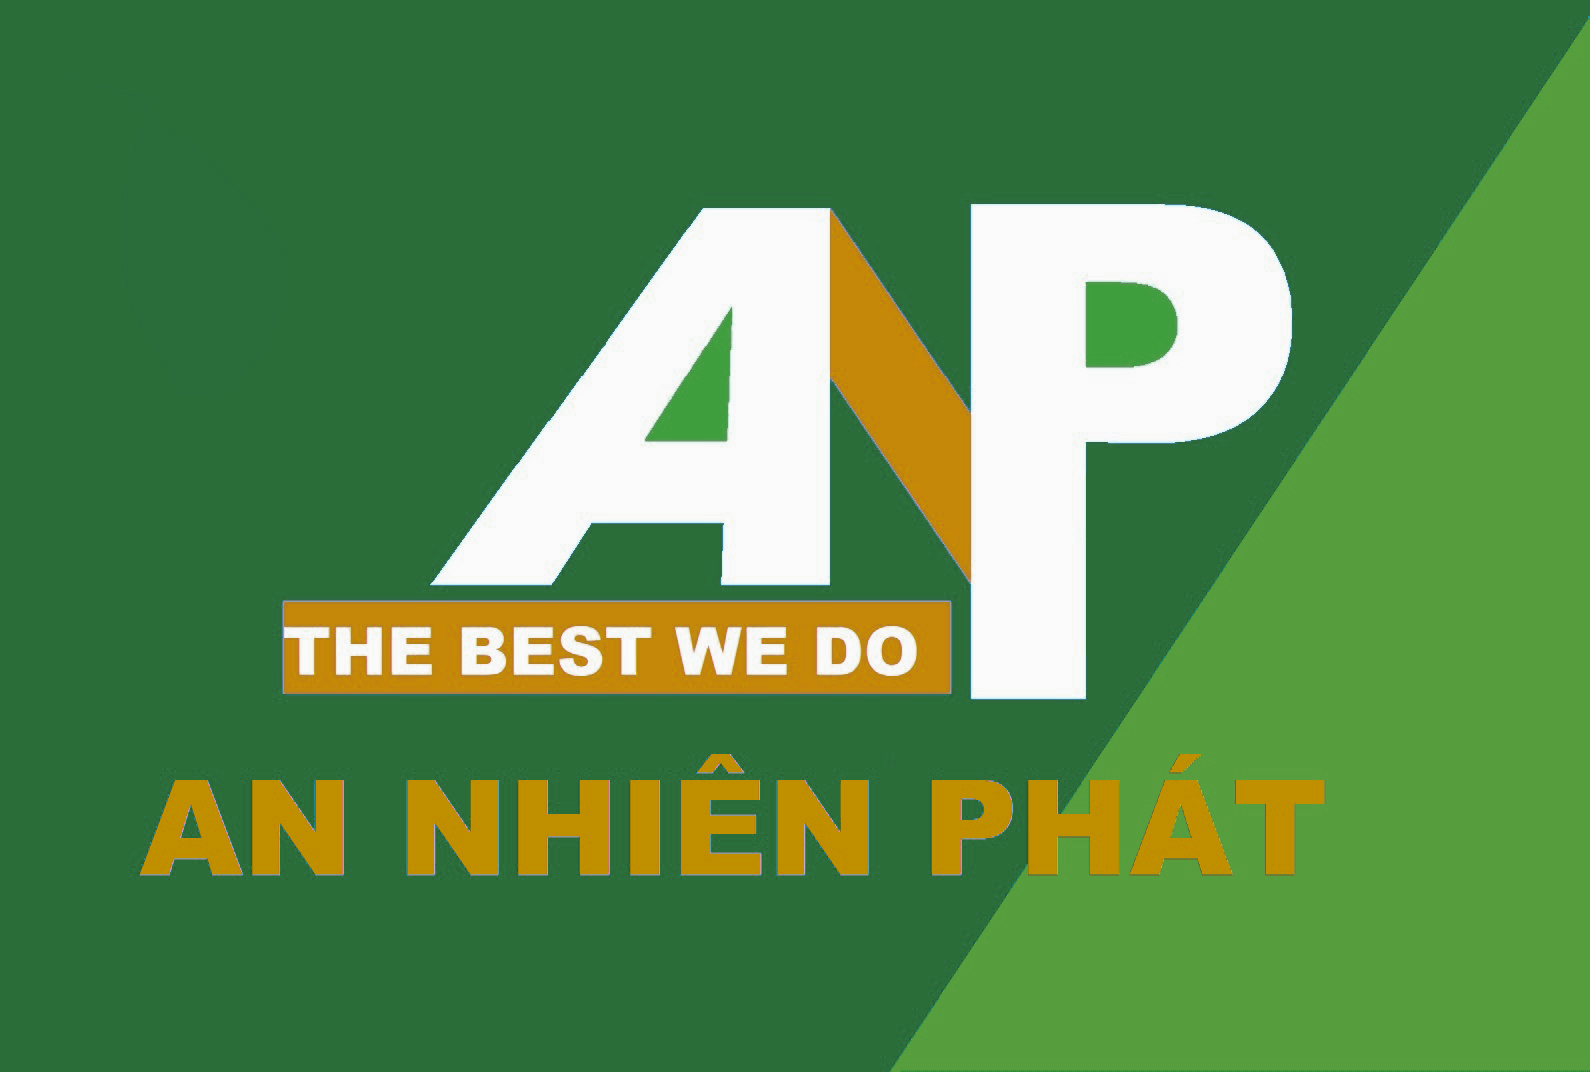 AN NHIEN PHAT – THE BEST WE DO